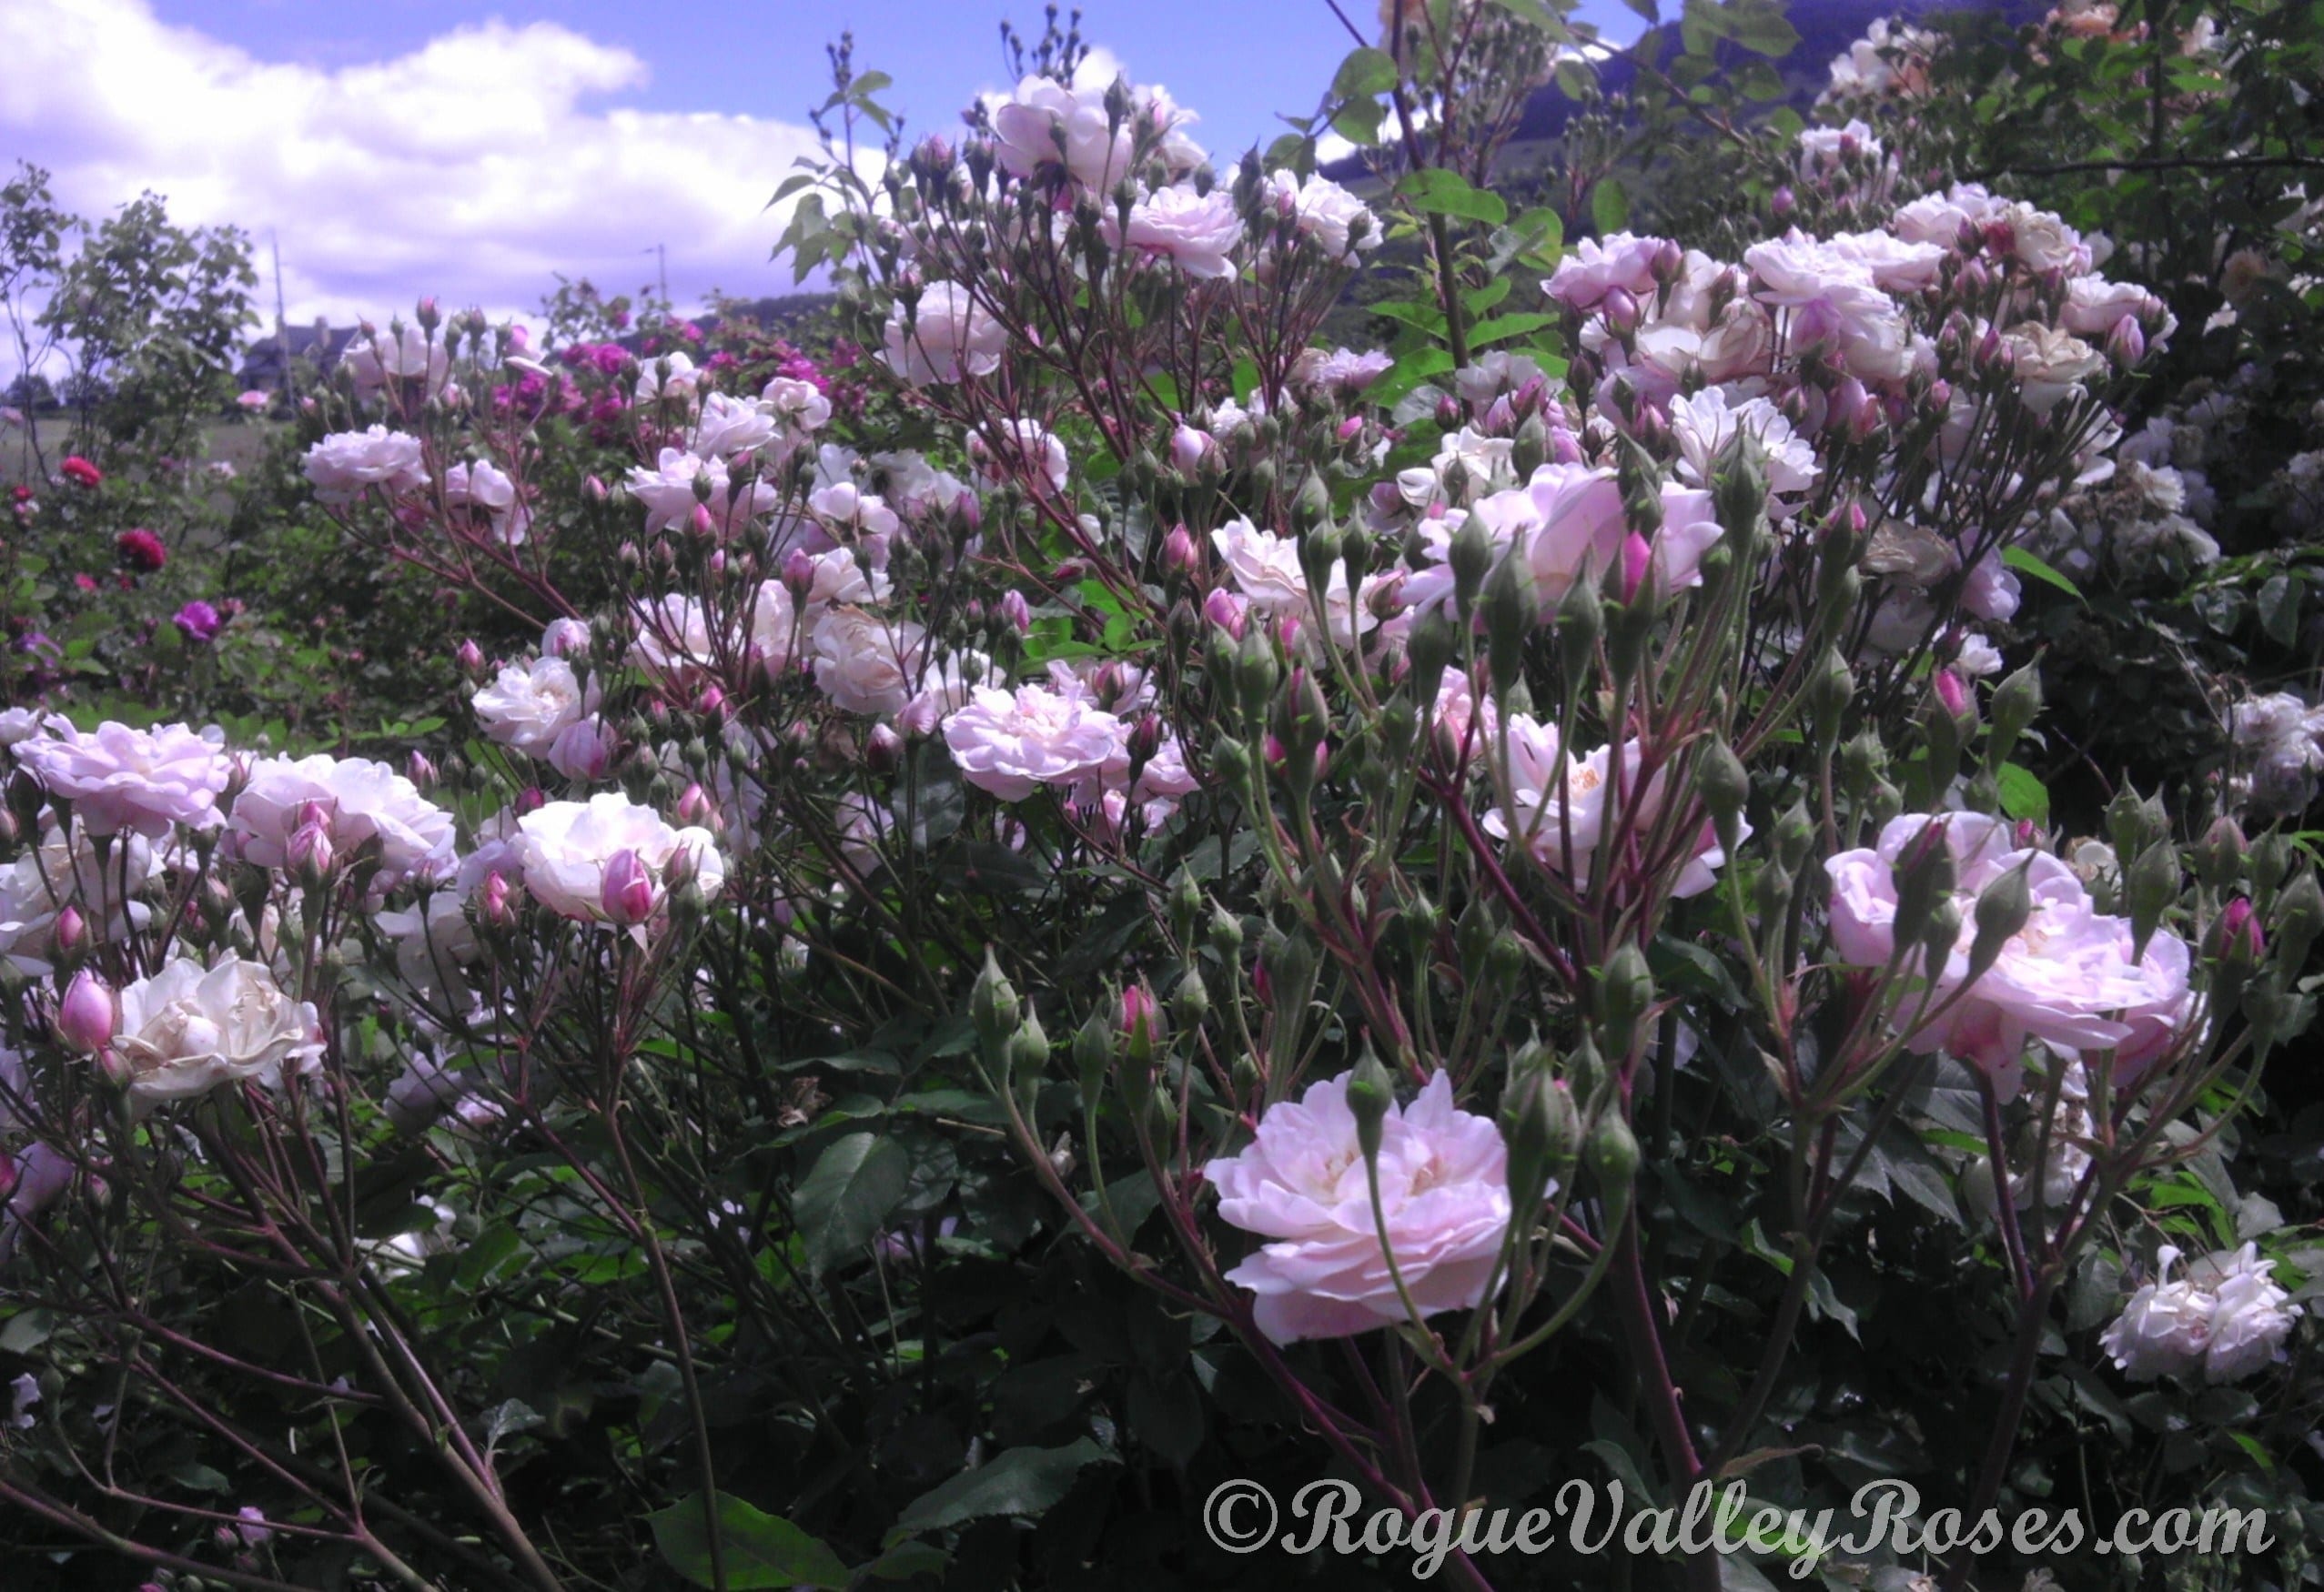 Blush Noisette Rogue Valley Roses